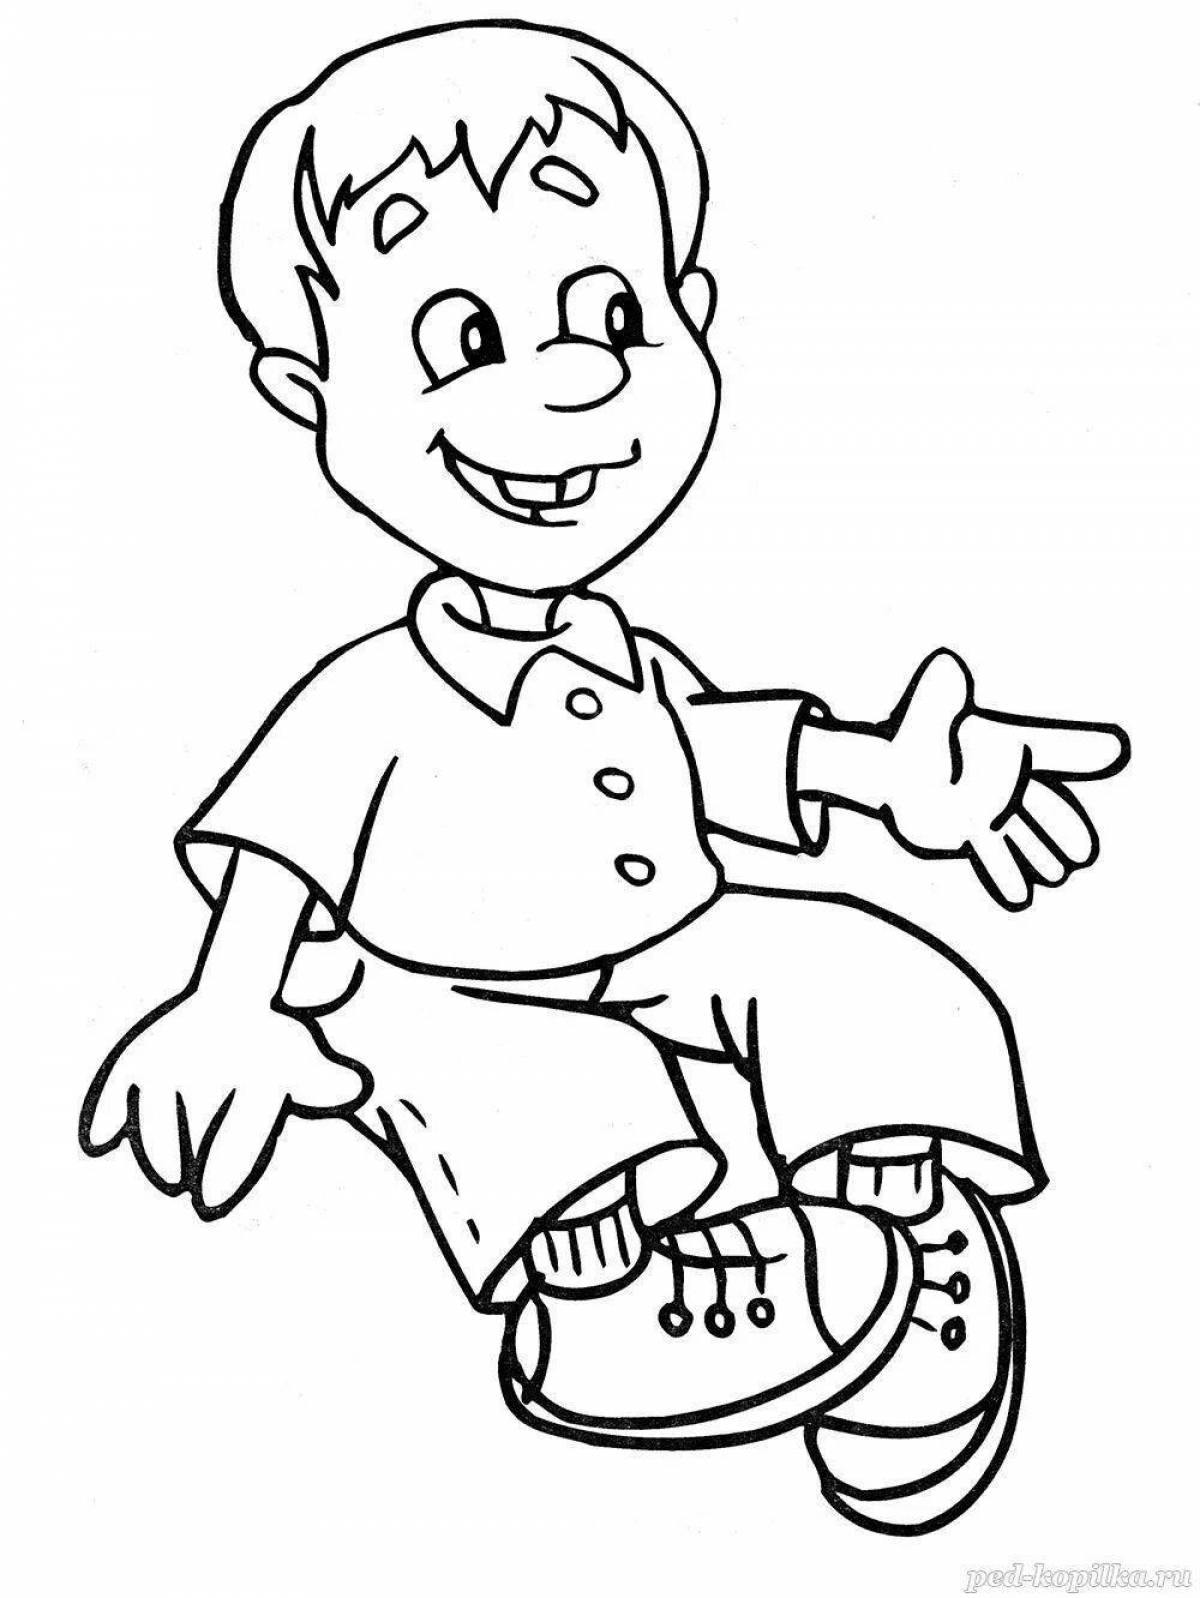 Coloring page energetic little boy